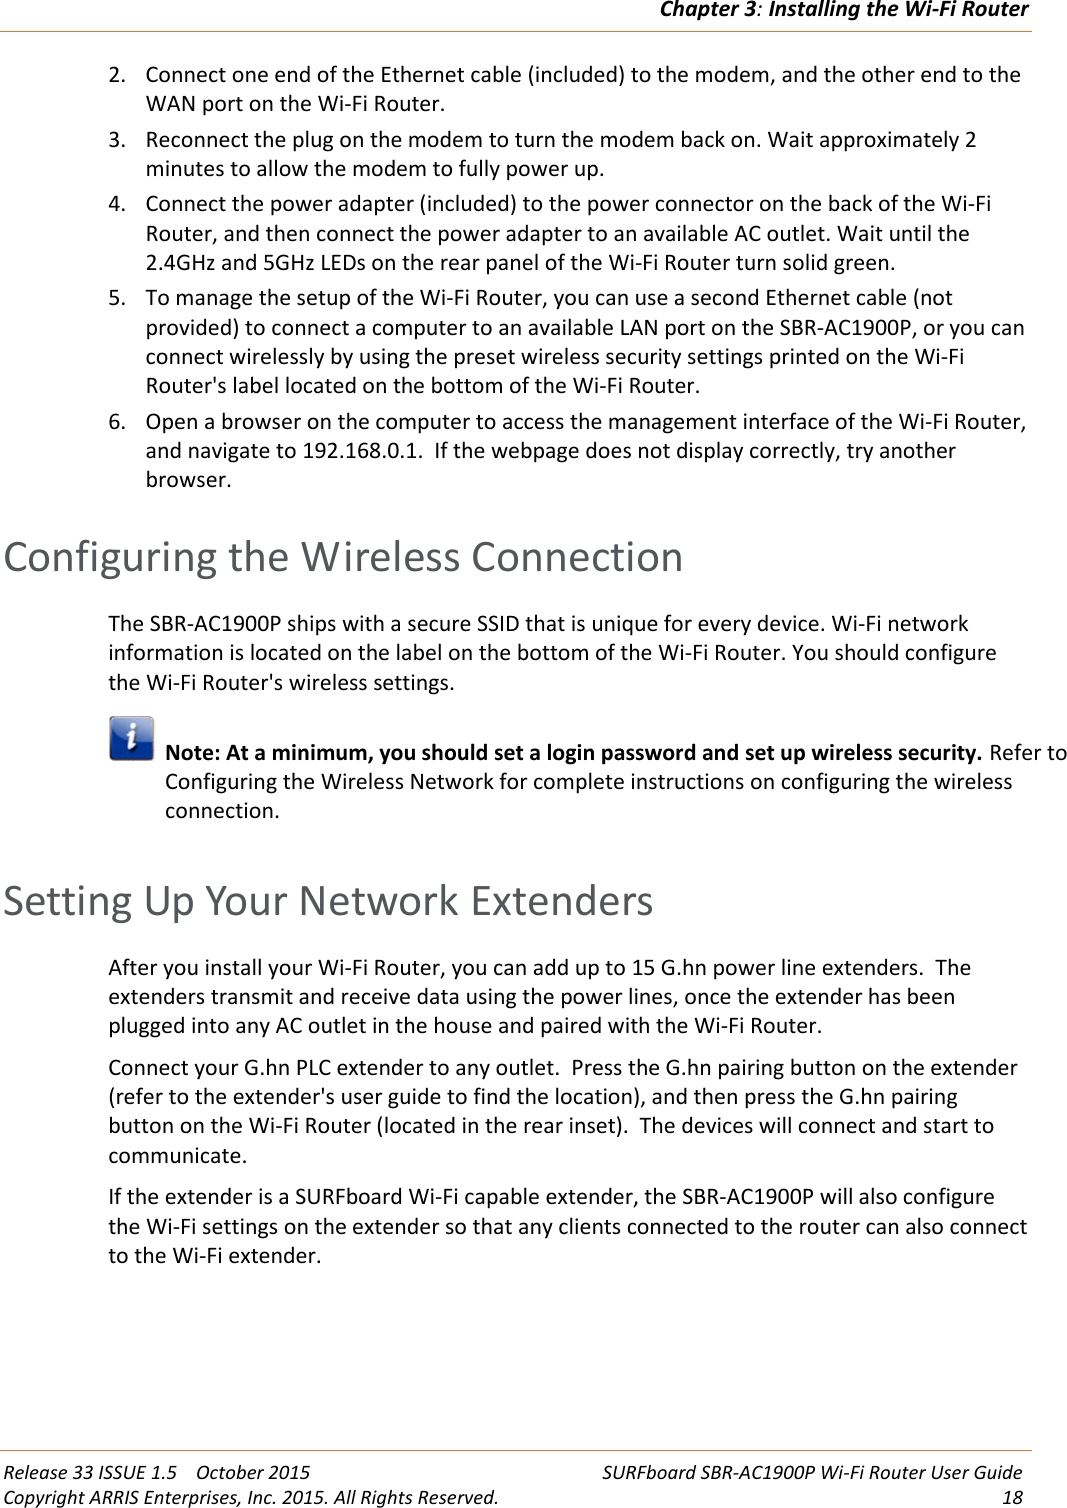 Chapter 3:Installing the Wi-Fi RouterRelease 33 ISSUE 1.5 October 2015 SURFboard SBR-AC1900P Wi-Fi Router User GuideCopyright ARRIS Enterprises, Inc. 2015. All Rights Reserved. 182. Connect one end of the Ethernet cable (included) to the modem, and the other end to theWAN port on the Wi-Fi Router.3. Reconnect the plug on the modem to turn the modem back on. Wait approximately 2minutes to allow the modem to fully power up.4. Connect the power adapter (included) to the power connector on the back of the Wi-FiRouter, and then connect the power adapter to an available AC outlet. Wait until the2.4GHz and 5GHz LEDs on the rear panel of the Wi-Fi Router turn solid green.5. To manage the setup of the Wi-Fi Router, you can use a second Ethernet cable (notprovided) to connect a computer to an available LAN port on the SBR-AC1900P, or you canconnect wirelessly by using the preset wireless security settings printed on the Wi-FiRouter&apos;s label located on the bottom of the Wi-Fi Router.6. Open a browser on the computer to access the management interface of the Wi-Fi Router,and navigate to 192.168.0.1. If the webpage does not display correctly, try anotherbrowser.Configuring the Wireless ConnectionThe SBR-AC1900P ships with a secure SSID that is unique for every device. Wi-Fi networkinformation is located on the label on the bottom of the Wi-Fi Router. You should configurethe Wi-Fi Router&apos;s wireless settings.Note: At a minimum, you should set a login password and set up wireless security. Refer toConfiguring the Wireless Network for complete instructions on configuring the wirelessconnection.Setting Up Your Network ExtendersAfter you install your Wi-Fi Router, you can add up to 15 G.hn power line extenders. Theextenders transmit and receive data using the power lines, once the extender has beenplugged into any AC outlet in the house and paired with the Wi-Fi Router.Connect your G.hn PLC extender to any outlet. Press the G.hn pairing button on the extender(refer to the extender&apos;s user guide to find the location), and then press the G.hn pairingbutton on the Wi-Fi Router (located in the rear inset). The devices will connect and start tocommunicate.If the extender is a SURFboard Wi-Fi capable extender, the SBR-AC1900P will also configurethe Wi-Fi settings on the extender so that any clients connected to the router can also connectto the Wi-Fi extender.